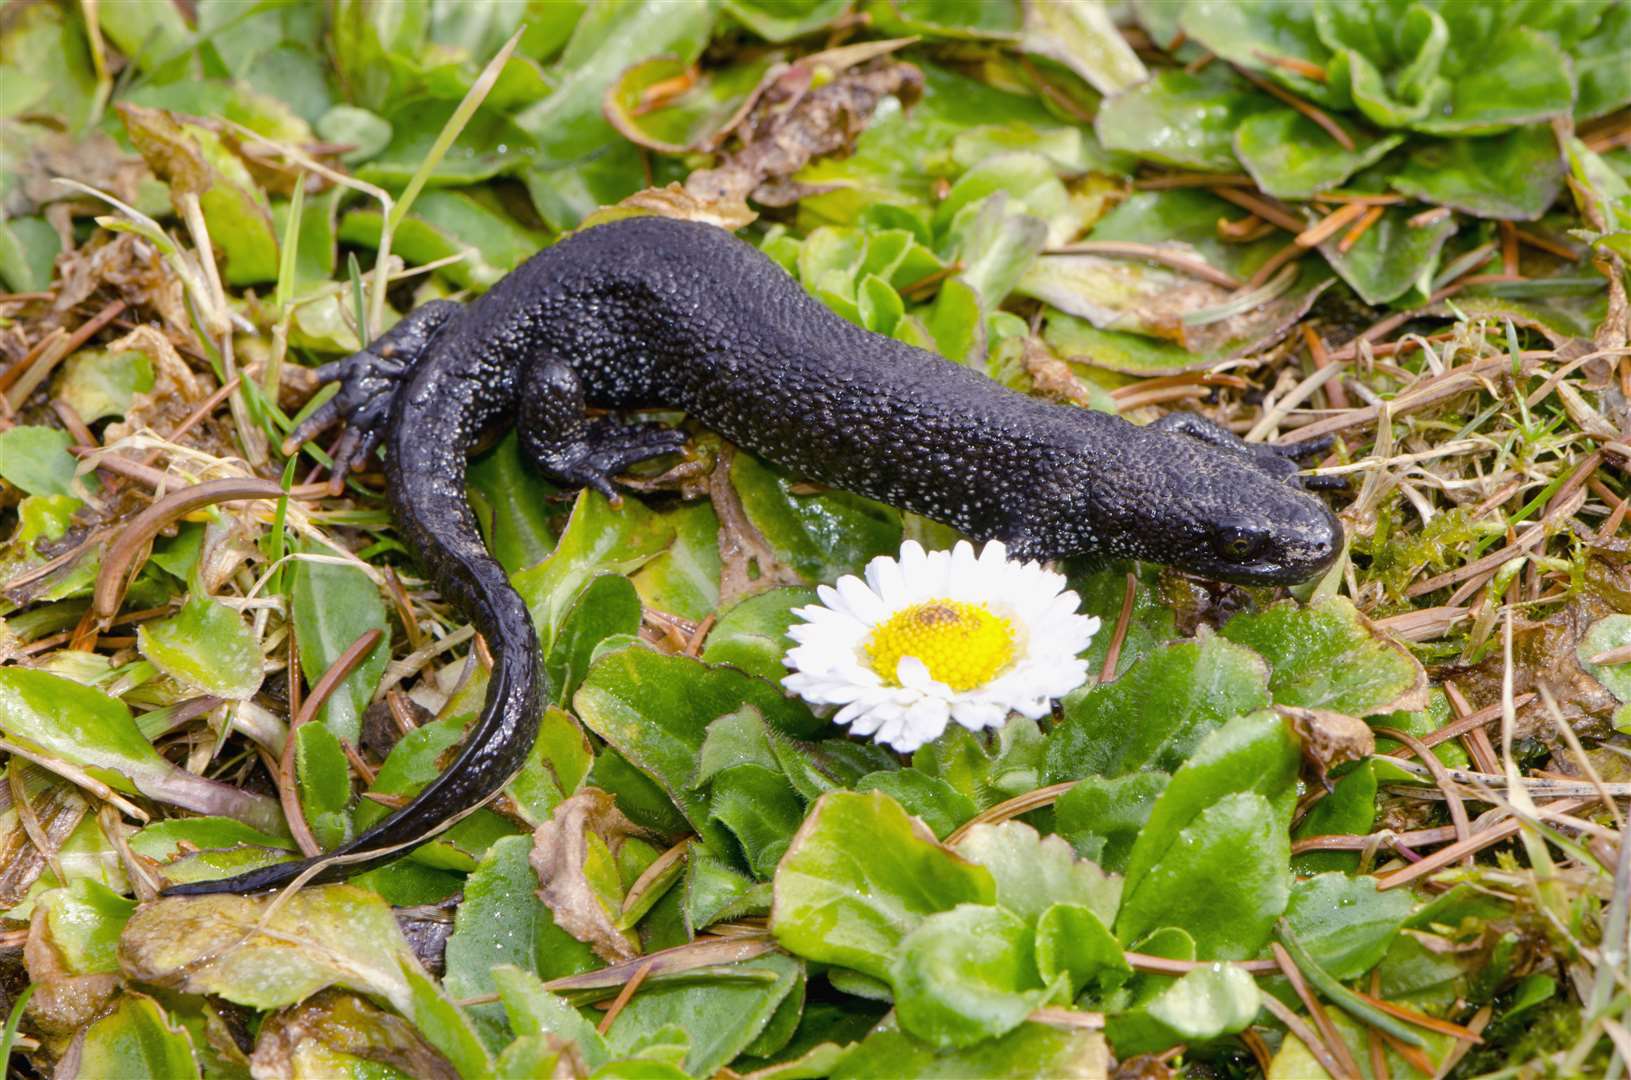 Great crested newt occur around Inverness.